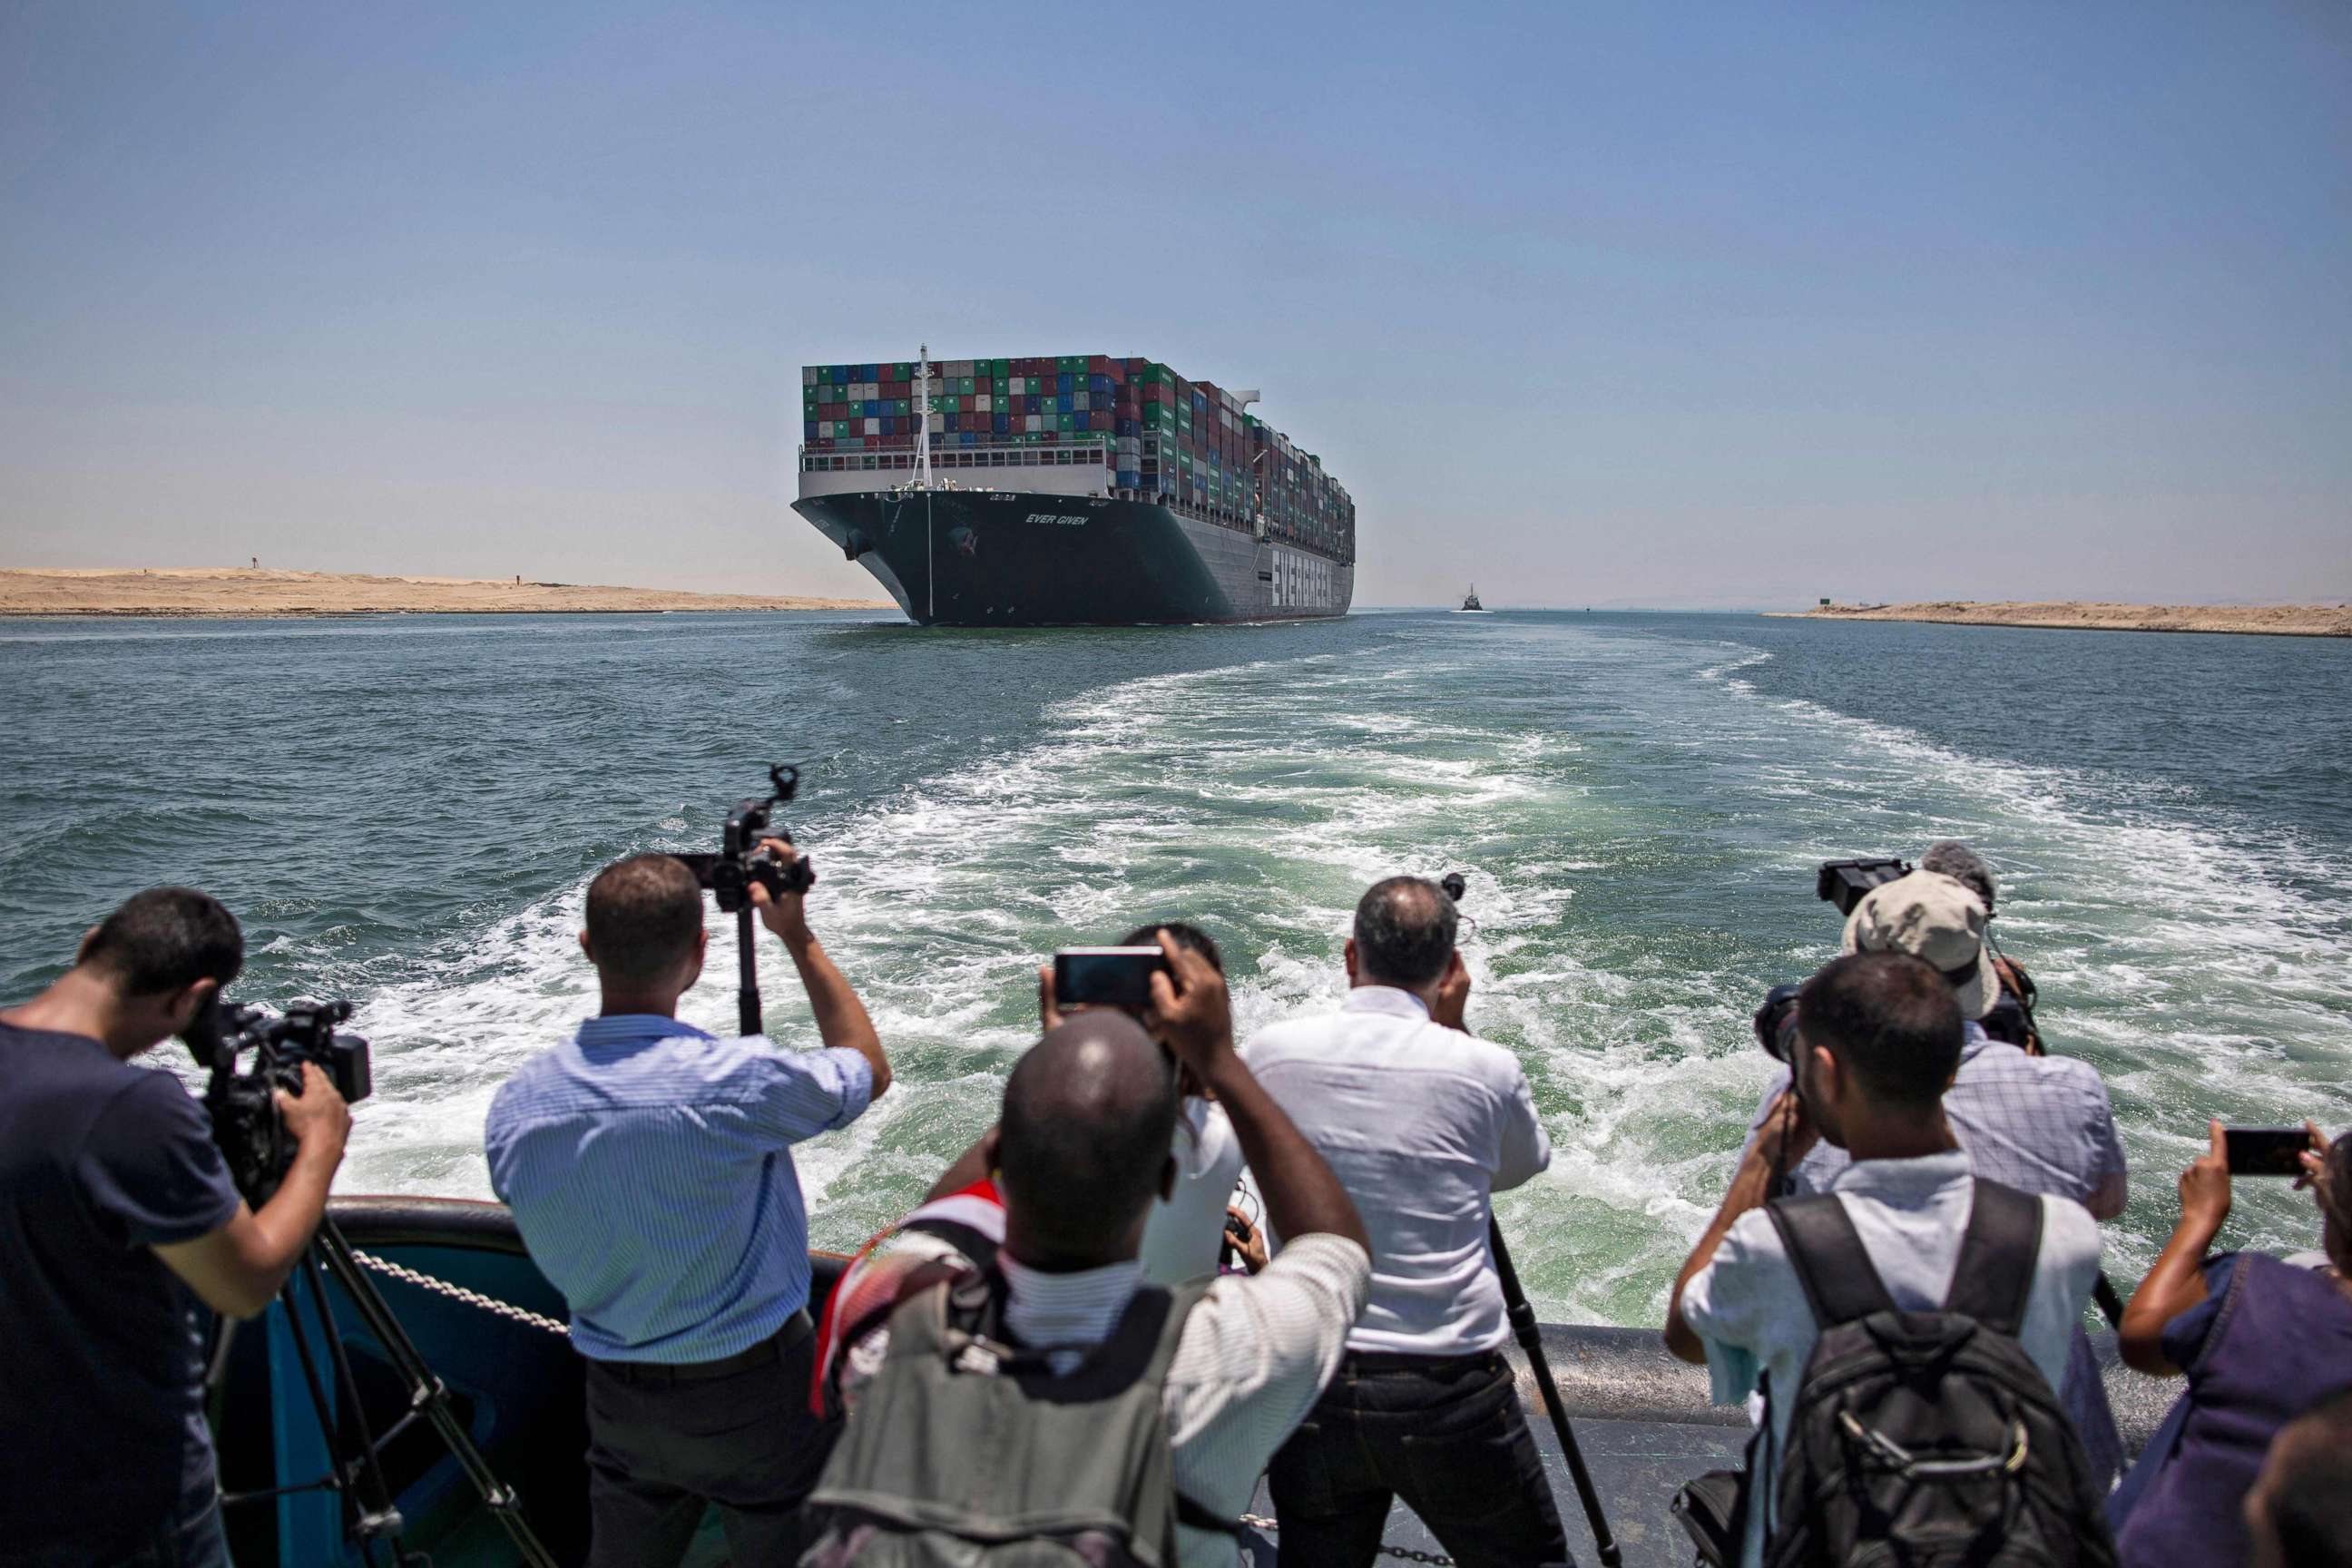 PHOTO: Journalists on a nearby boat film the Panama-flagged MV Ever Given container ship sailing along Egypt's Suez Canal near the canal's central city of Ismailia on July 5, 2021.